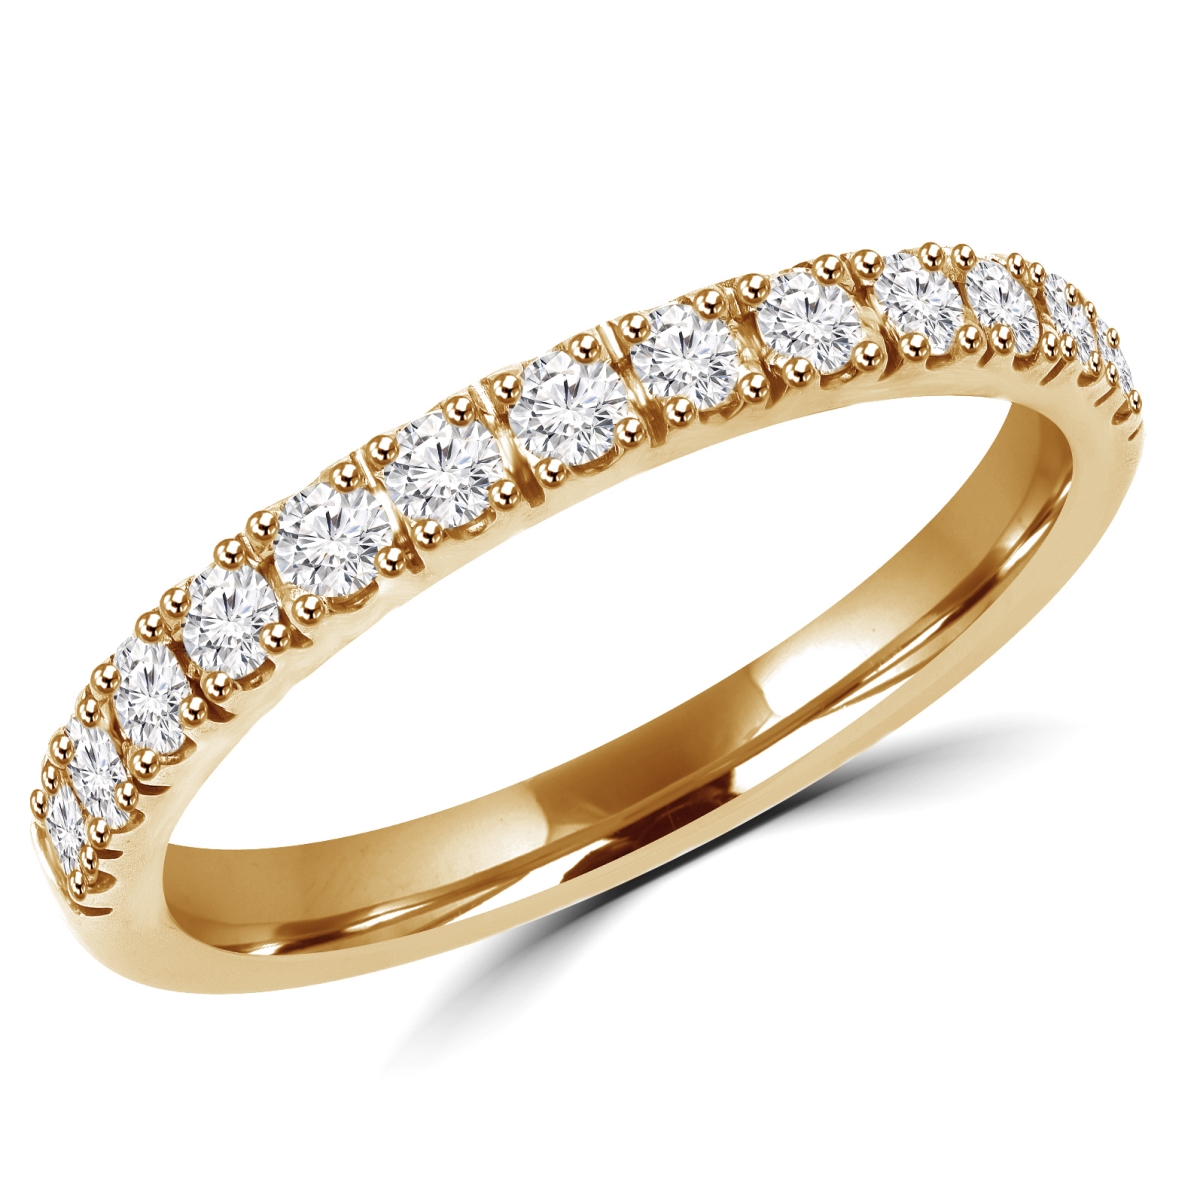 Picture of Majesty Diamonds MD180187-5.75 0.3 CTW Round Diamond Semi-Eternity Wedding Band Ring in 14K Yellow Gold - Size 5.75